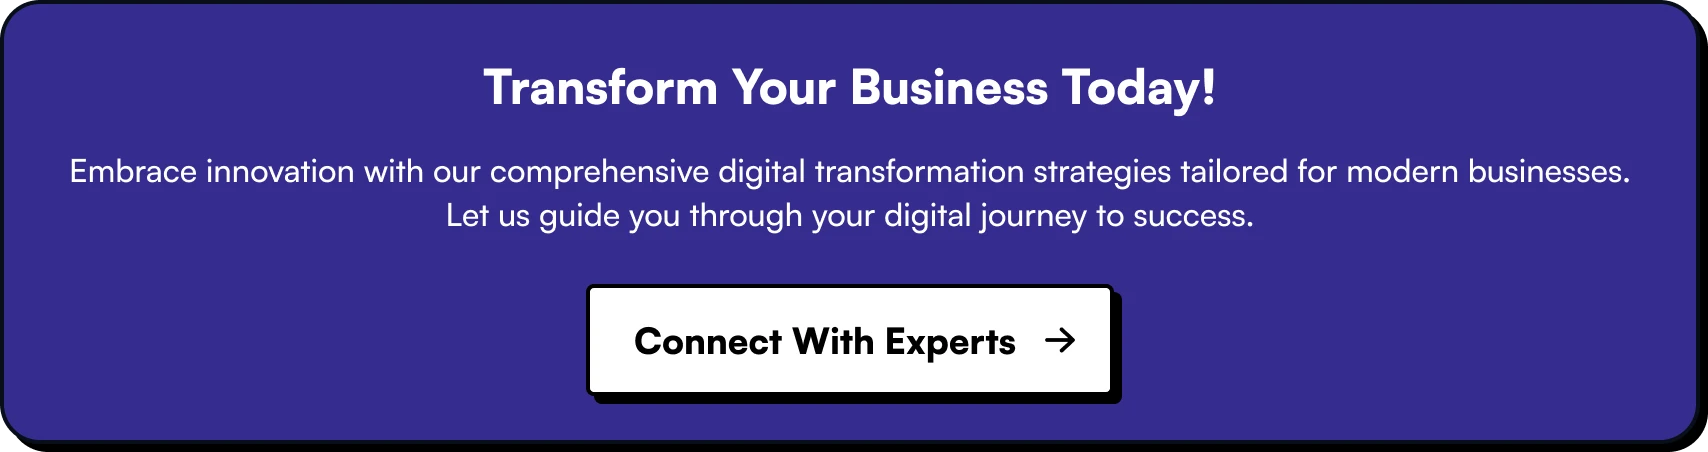 digitally transform Your Business Today!